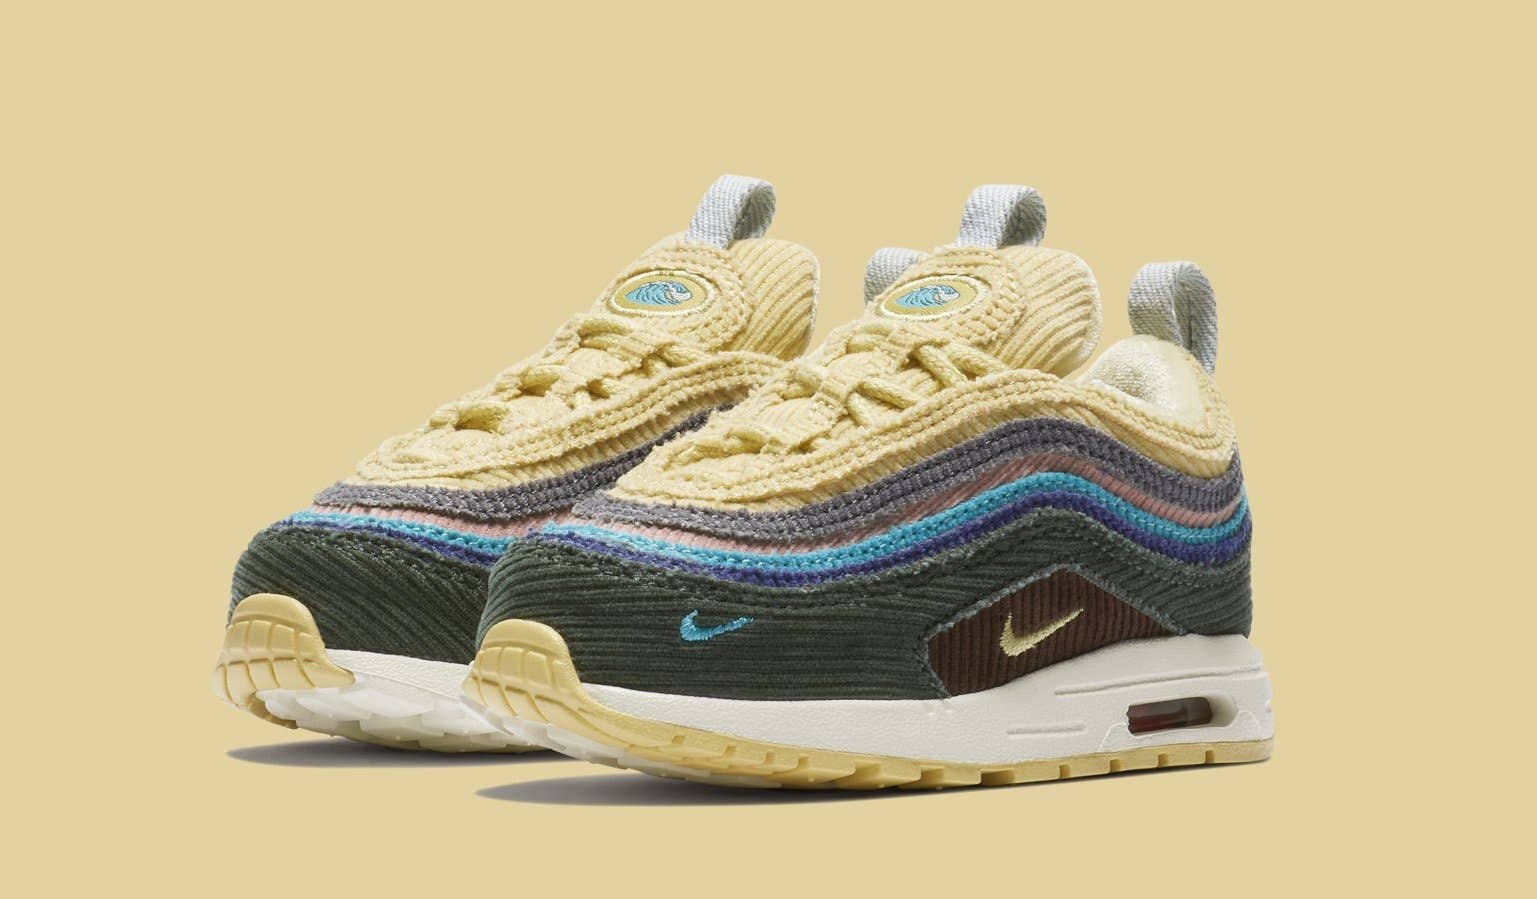 One More Chance at Sean Wotherspoon's Air Max | Complex